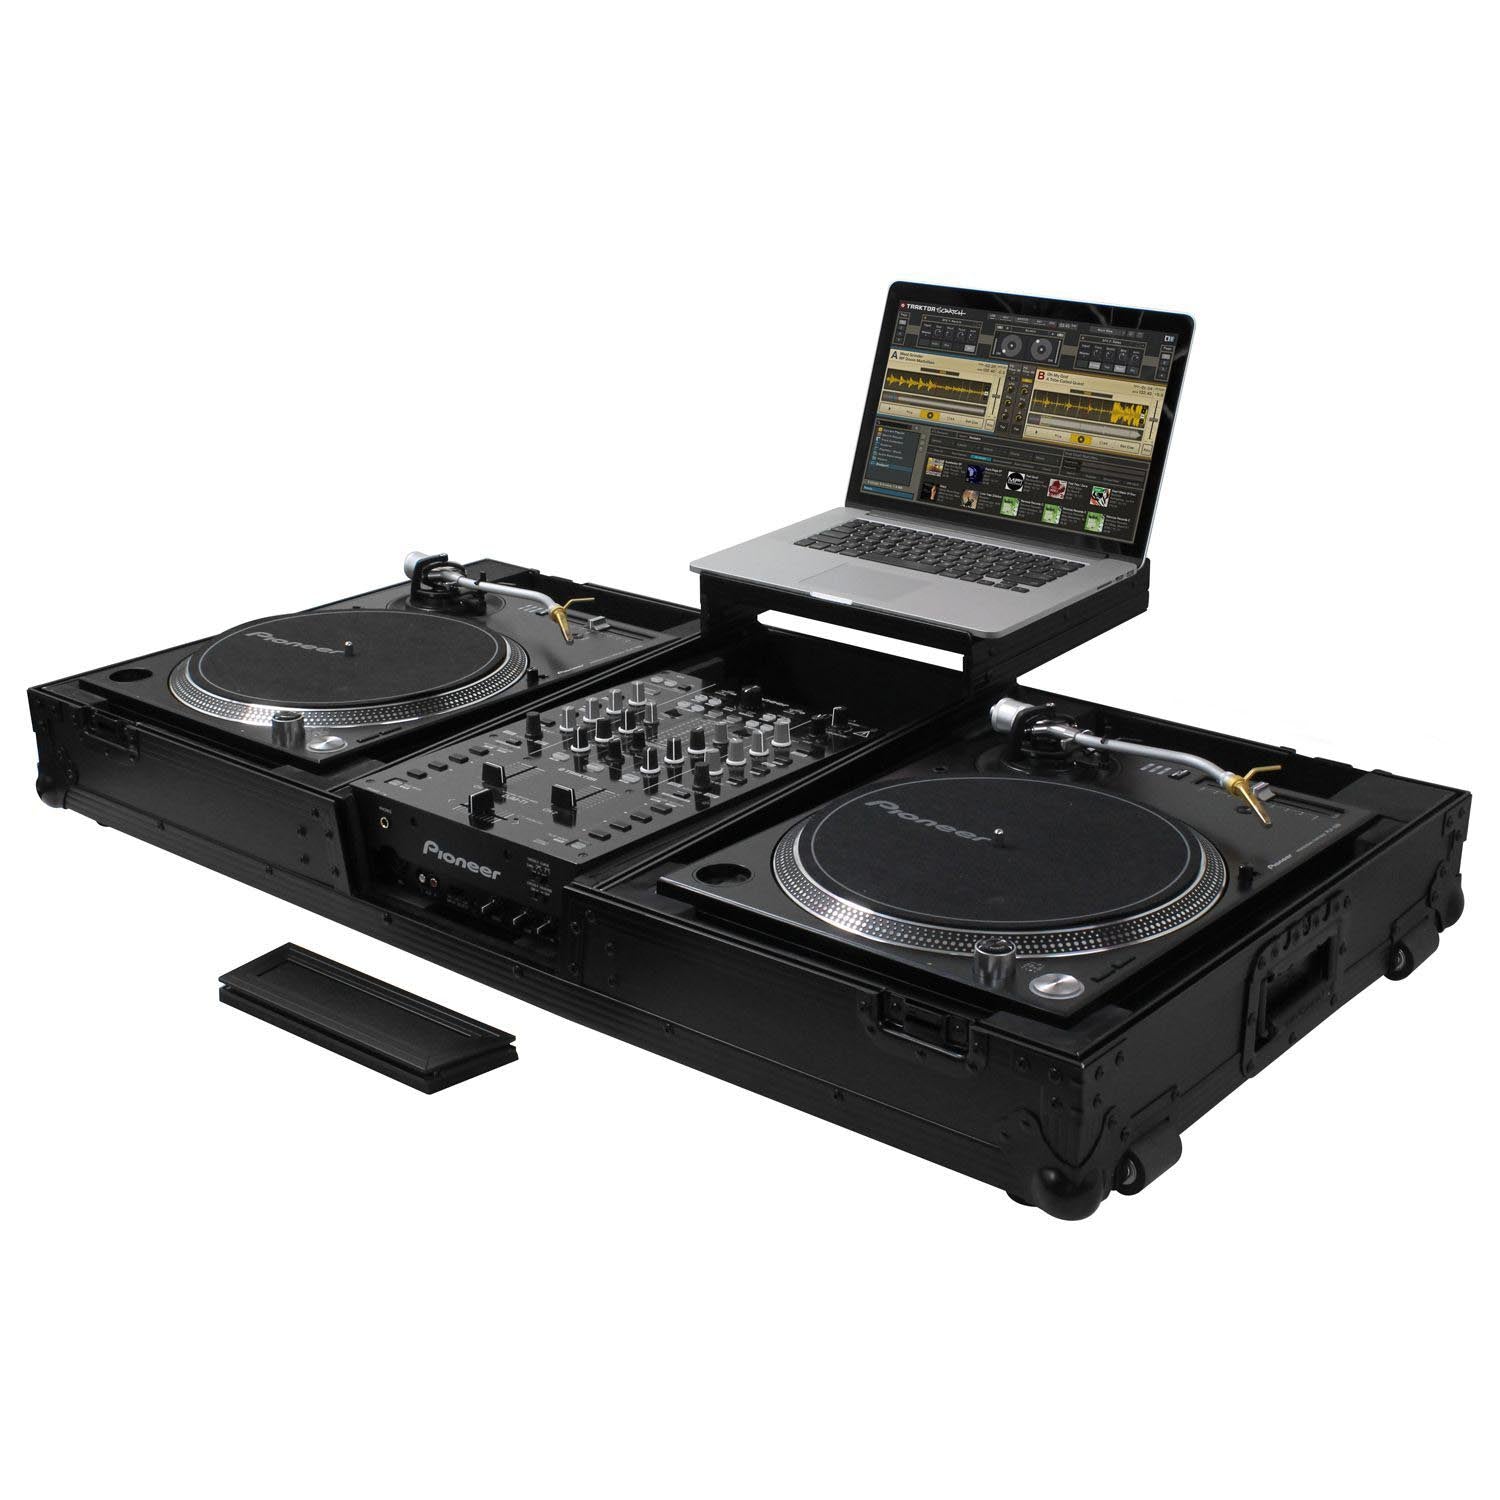 Odyssey FZGSLBM10WRBL Black Low Profile 10″ Format DJ Mixer and Two Battle Position Turntables Flight Coffin Case with Wheels and Glide Platform - Hollywood DJ